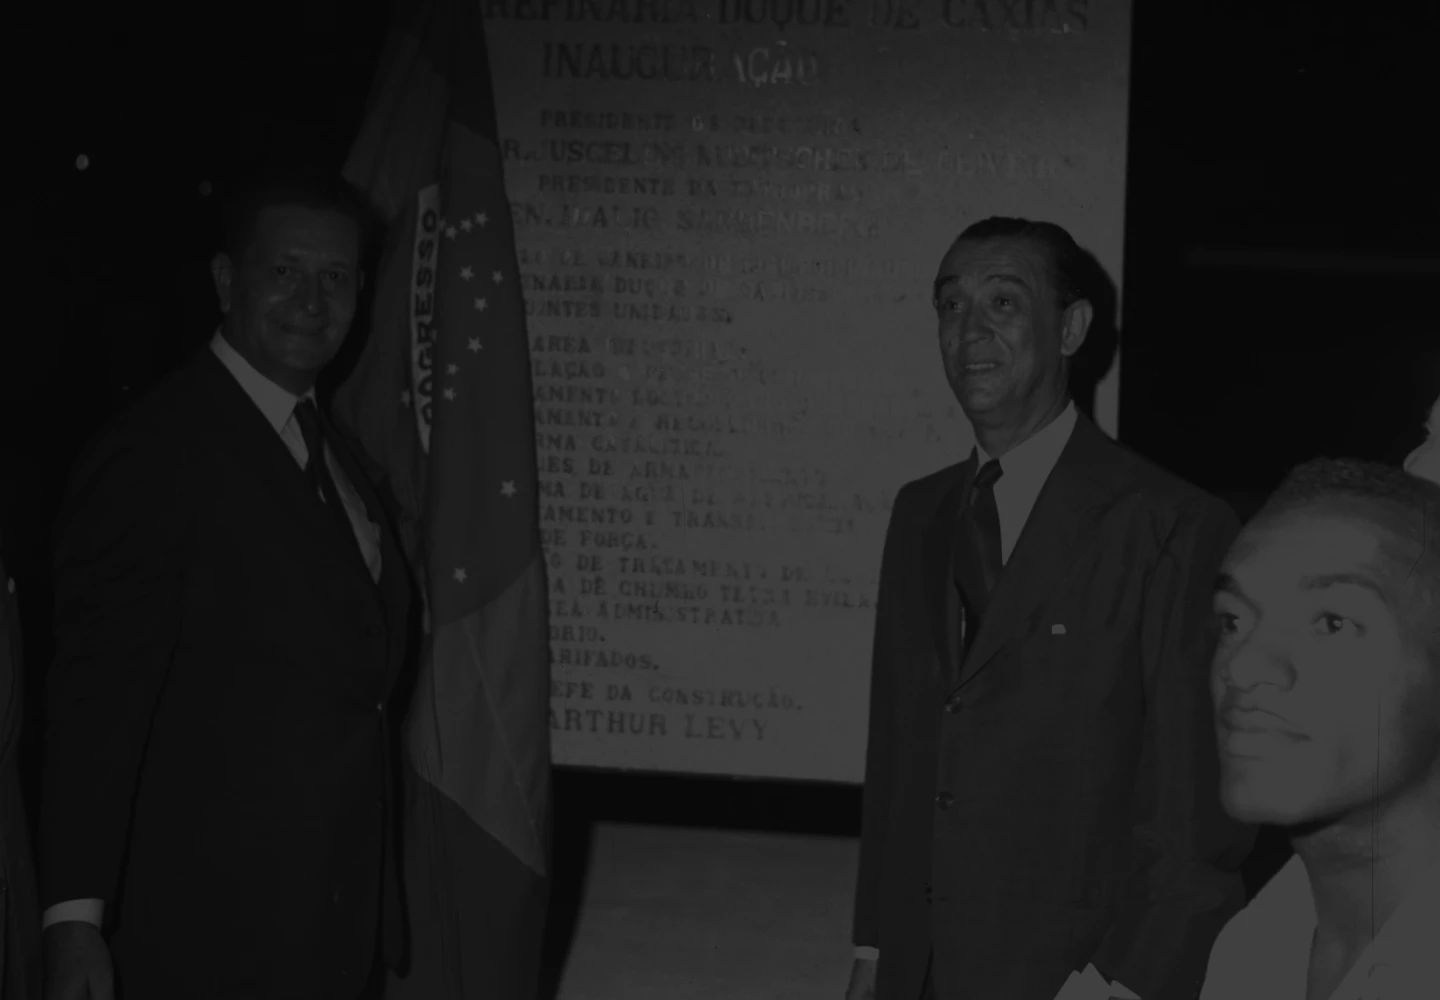 Black and white photo of the visit of then-president Juscelino Kubitschek to the Reduc refinery.